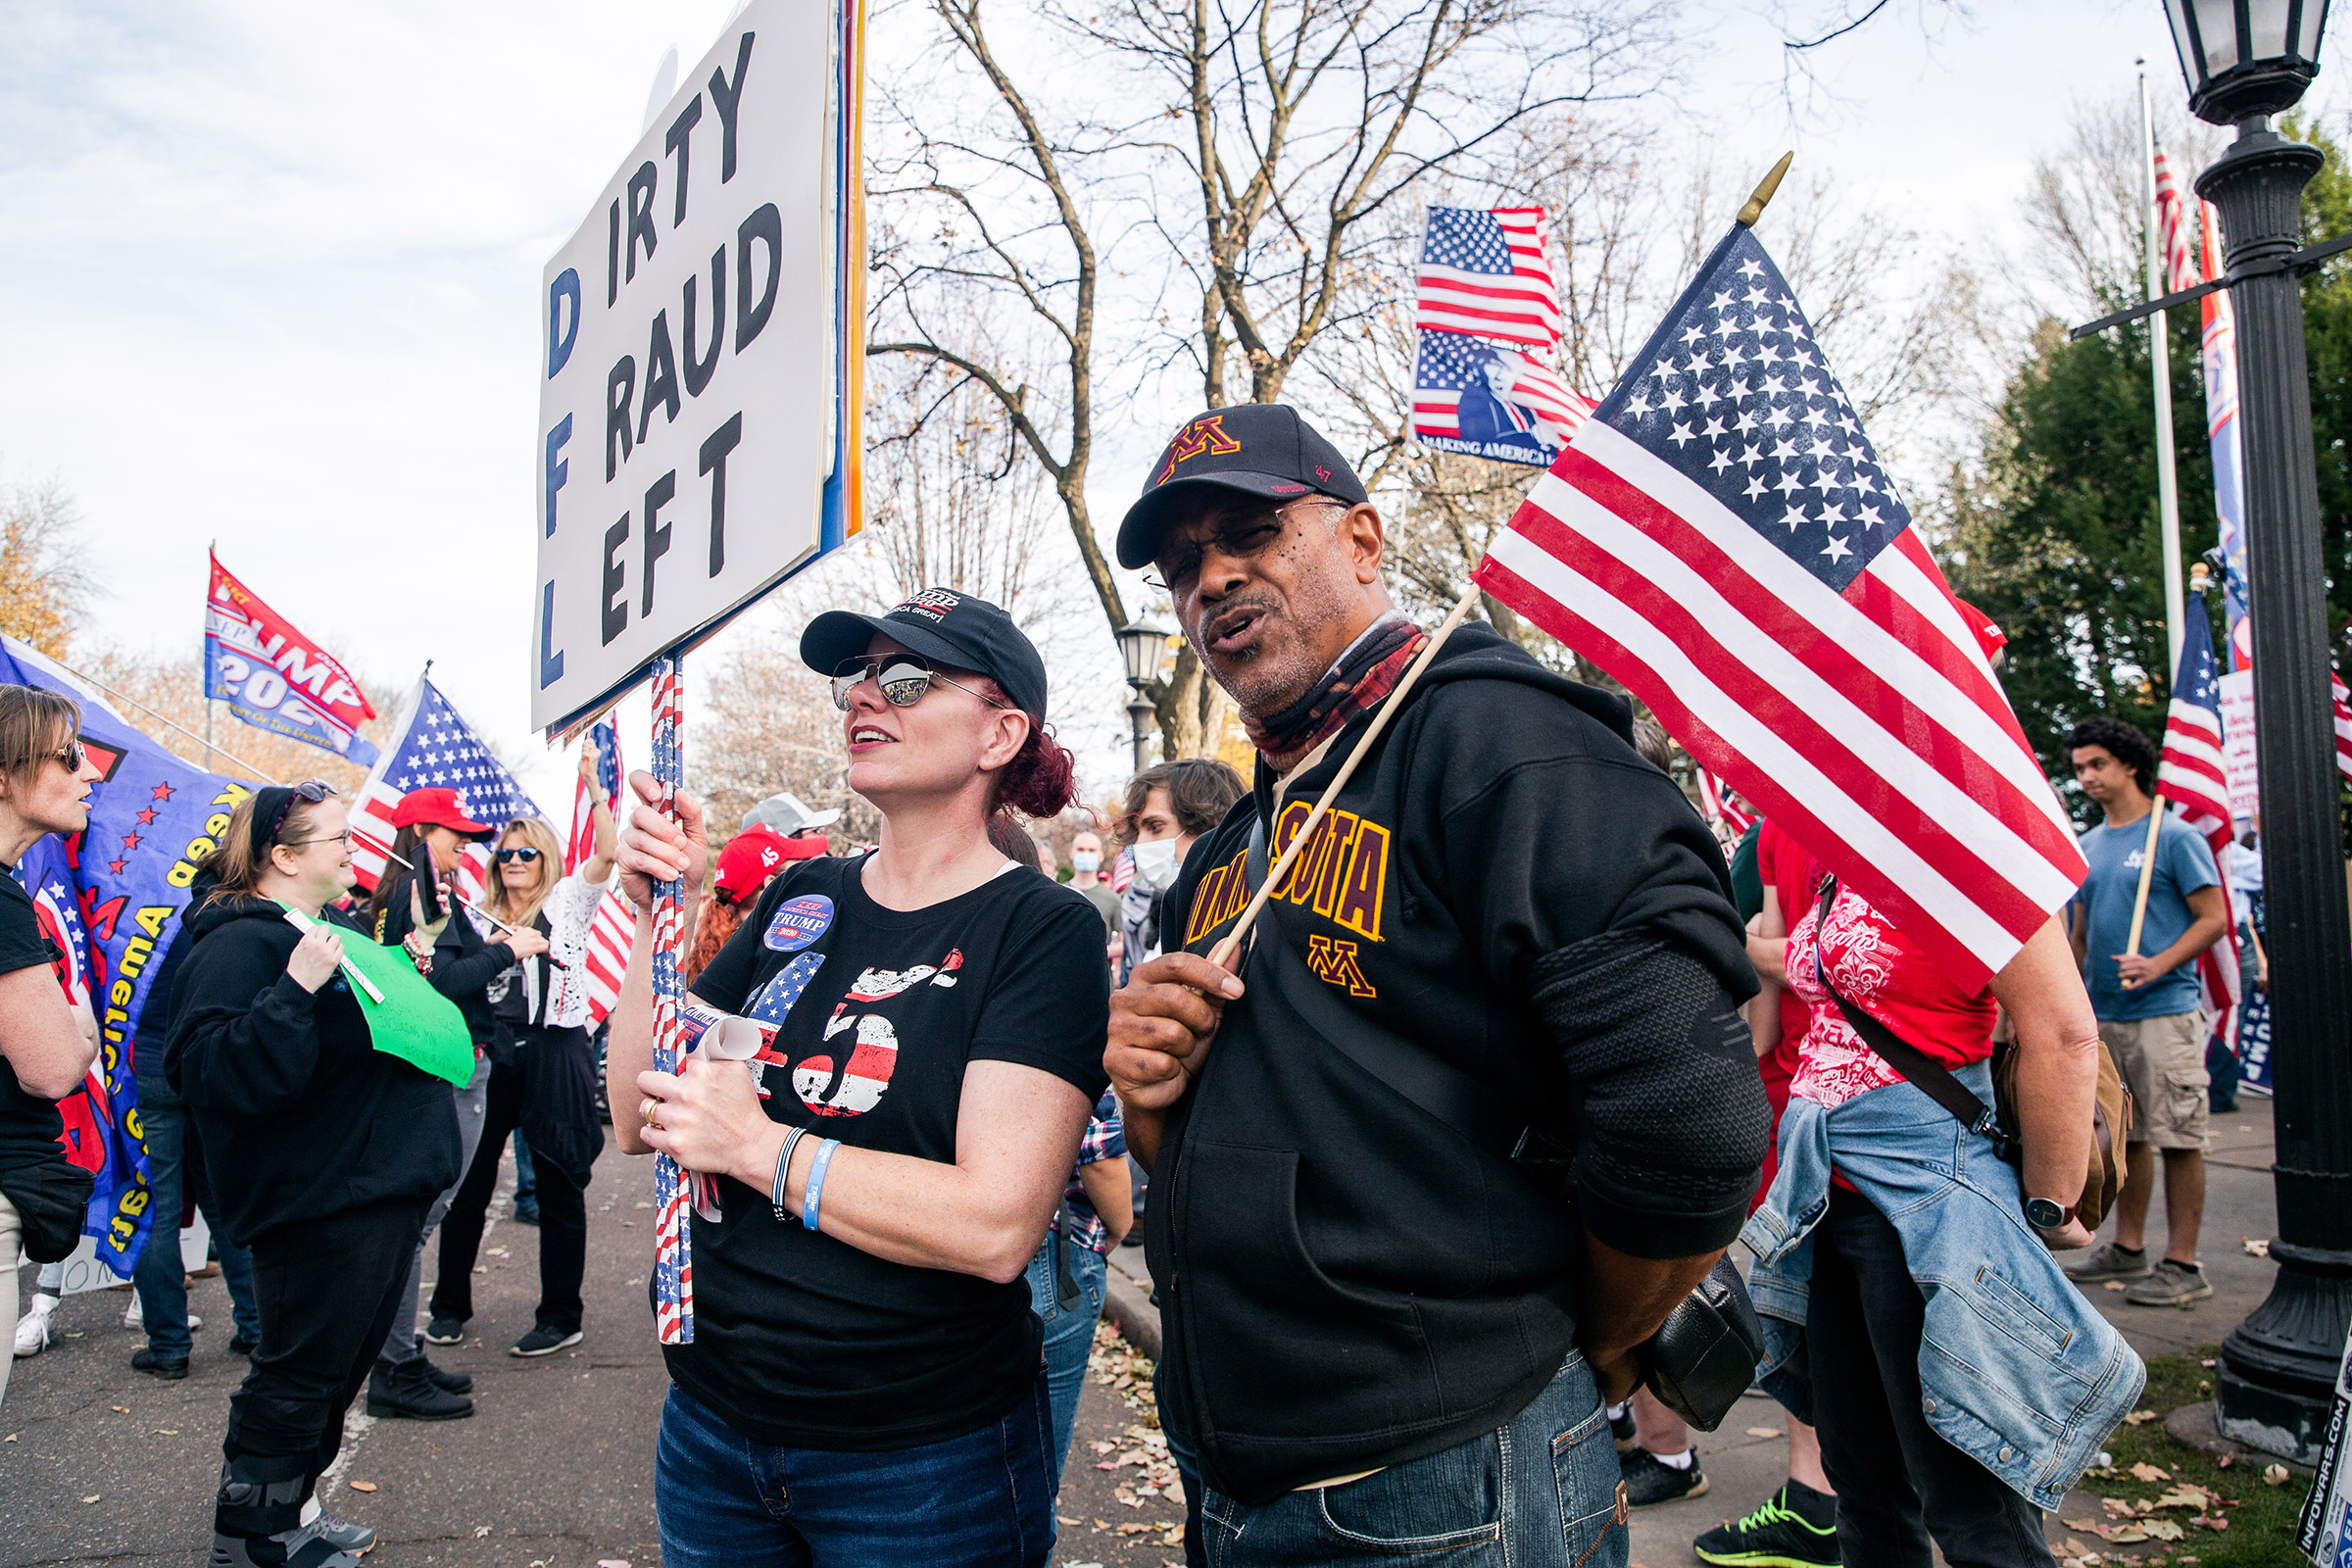 Trump supporters protest the outcome of the election in front of the Minnesota Governor's mansion in St. Paul, Minn., on Nov. 7. (Patience Zalanga for TIME)